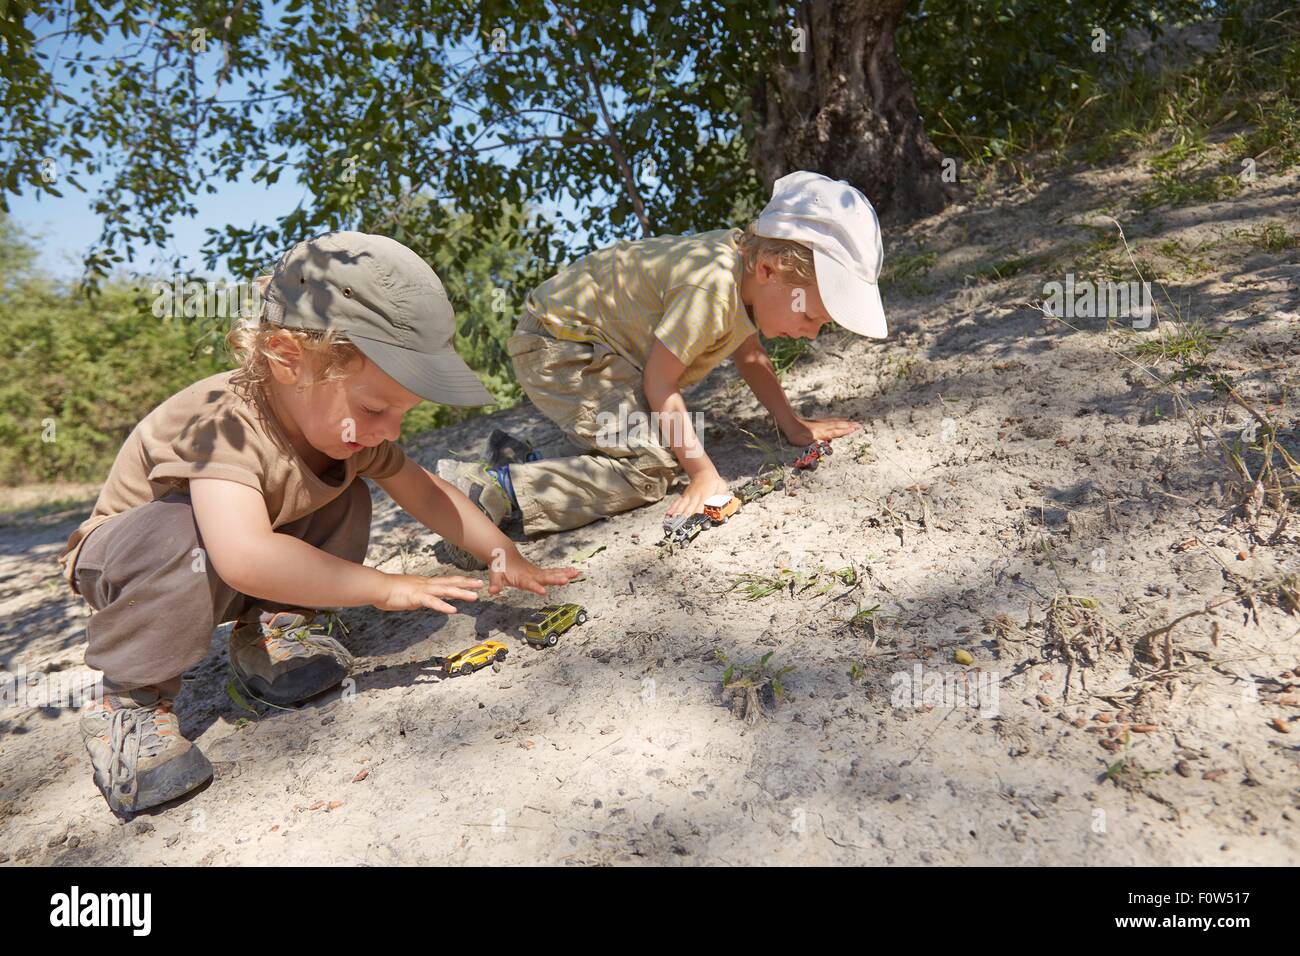 Deux jeunes garçons, Playing with toy cars on sand Banque D'Images